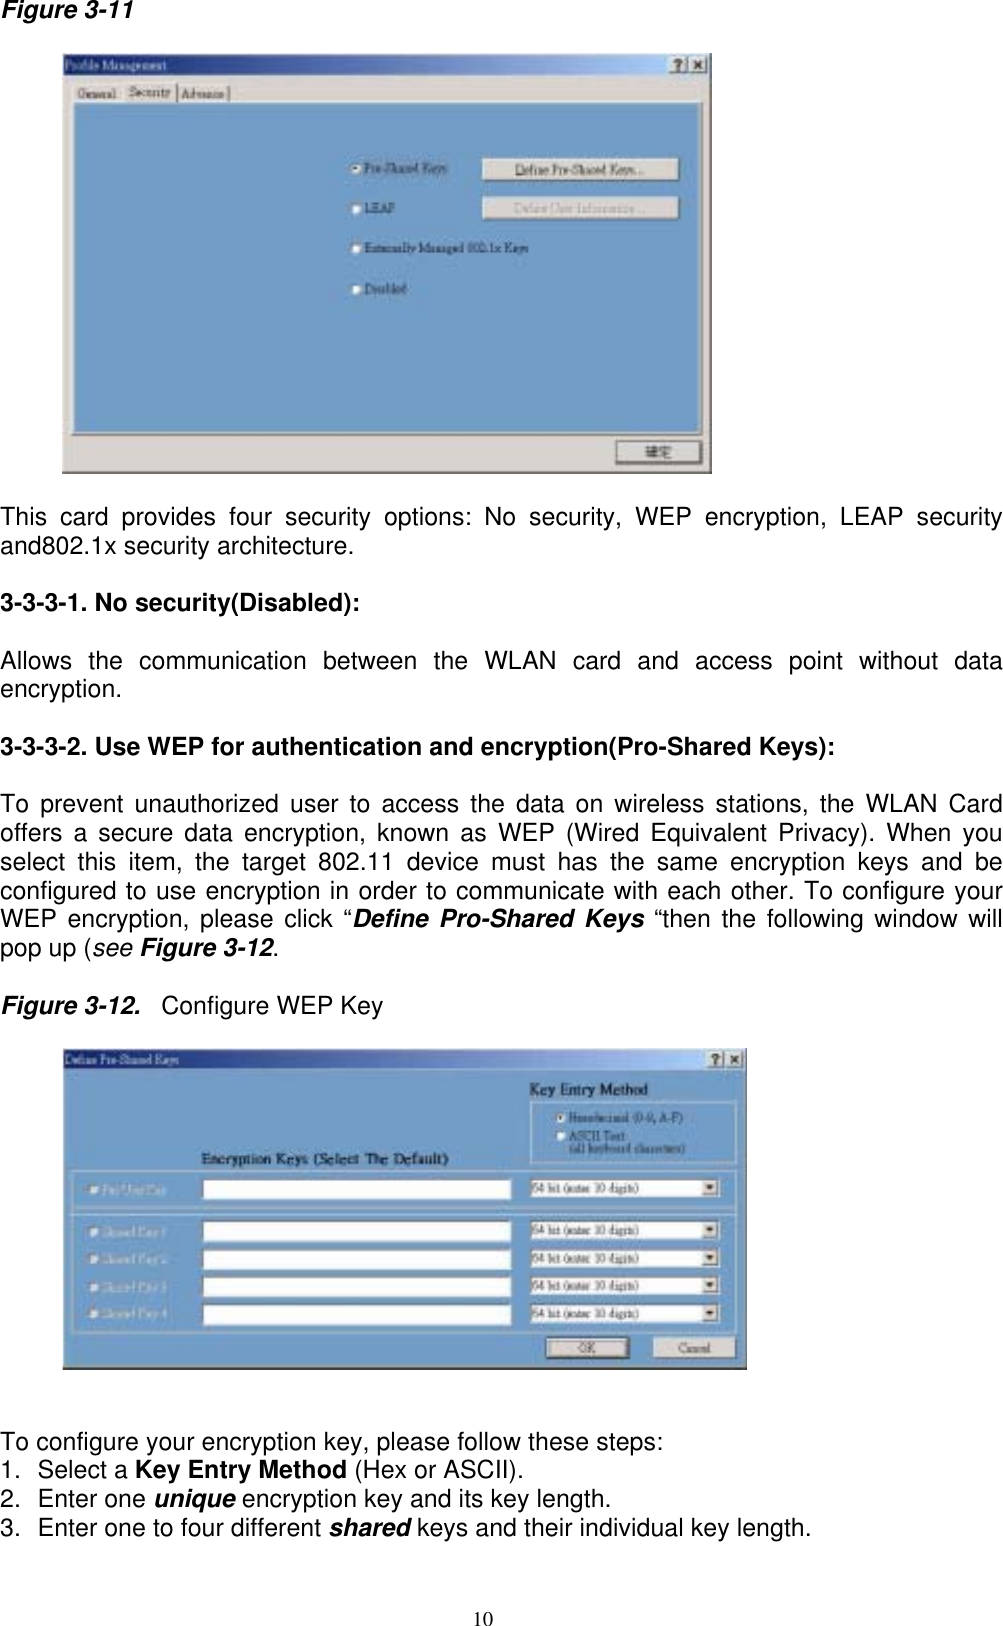 10  Figure 3-11          This card provides four security options: No security, WEP encryption, LEAP security and802.1x security architecture.  3-3-3-1. No security(Disabled):    Allows the communication between the WLAN card and access point without data encryption.  3-3-3-2. Use WEP for authentication and encryption(Pro-Shared Keys):  To prevent unauthorized user to access the data on wireless stations, the WLAN Card offers a secure data encryption, known as WEP (Wired Equivalent Privacy). When you select this item, the target 802.11 device must has the same encryption keys and be configured to use encryption in order to communicate with each other. To configure your WEP encryption, please click “Define Pro-Shared Keys “then the following window will pop up (see Figure 3-12.  Figure 3-12.  Configure WEP Key     To configure your encryption key, please follow these steps: 1. Select a Key Entry Method (Hex or ASCII). 2. Enter one unique encryption key and its key length. 3.  Enter one to four different shared keys and their individual key length.   